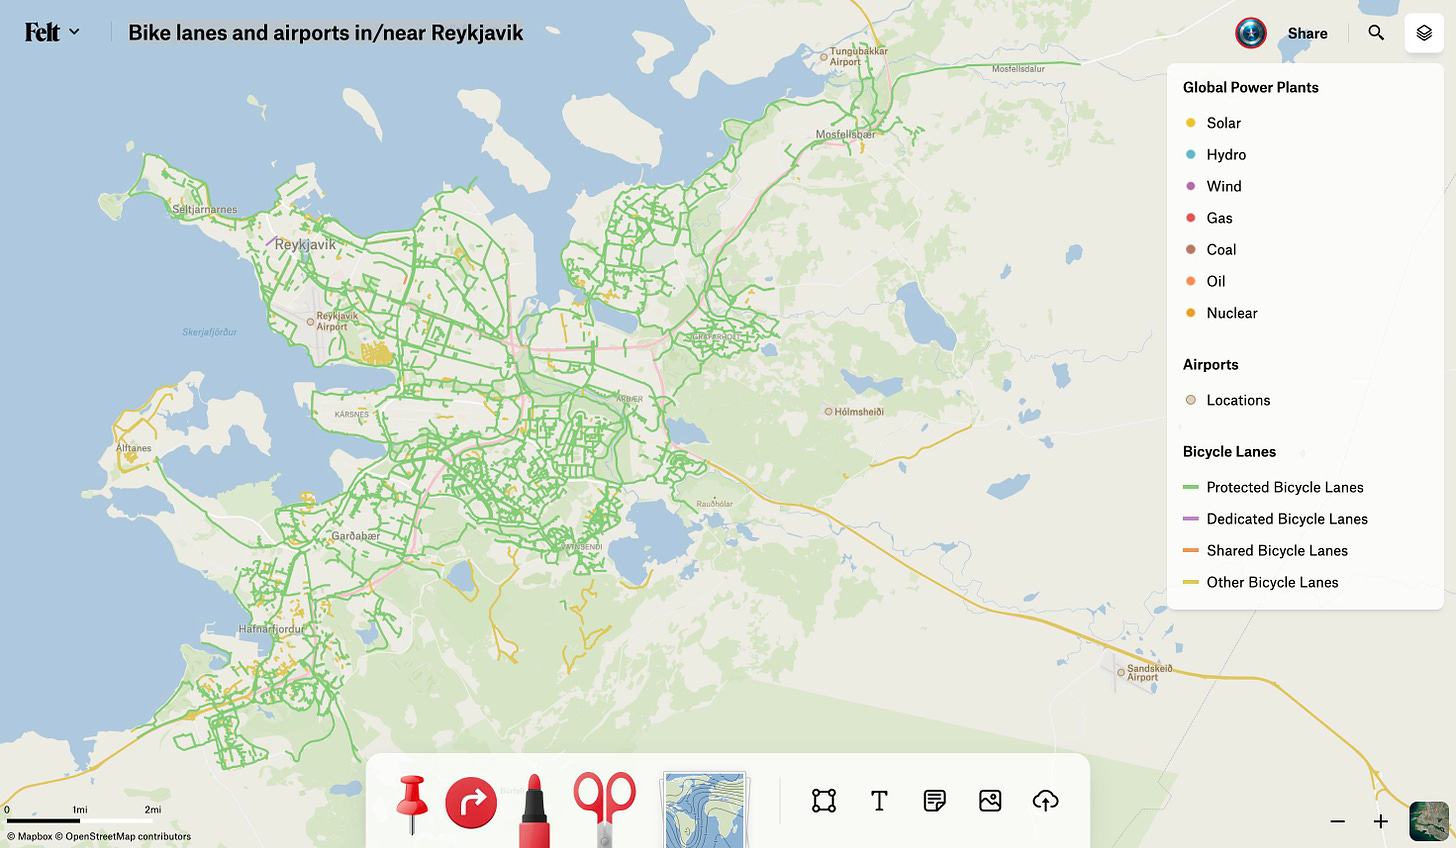 map of bike lanes and airports in/near Reykjavik